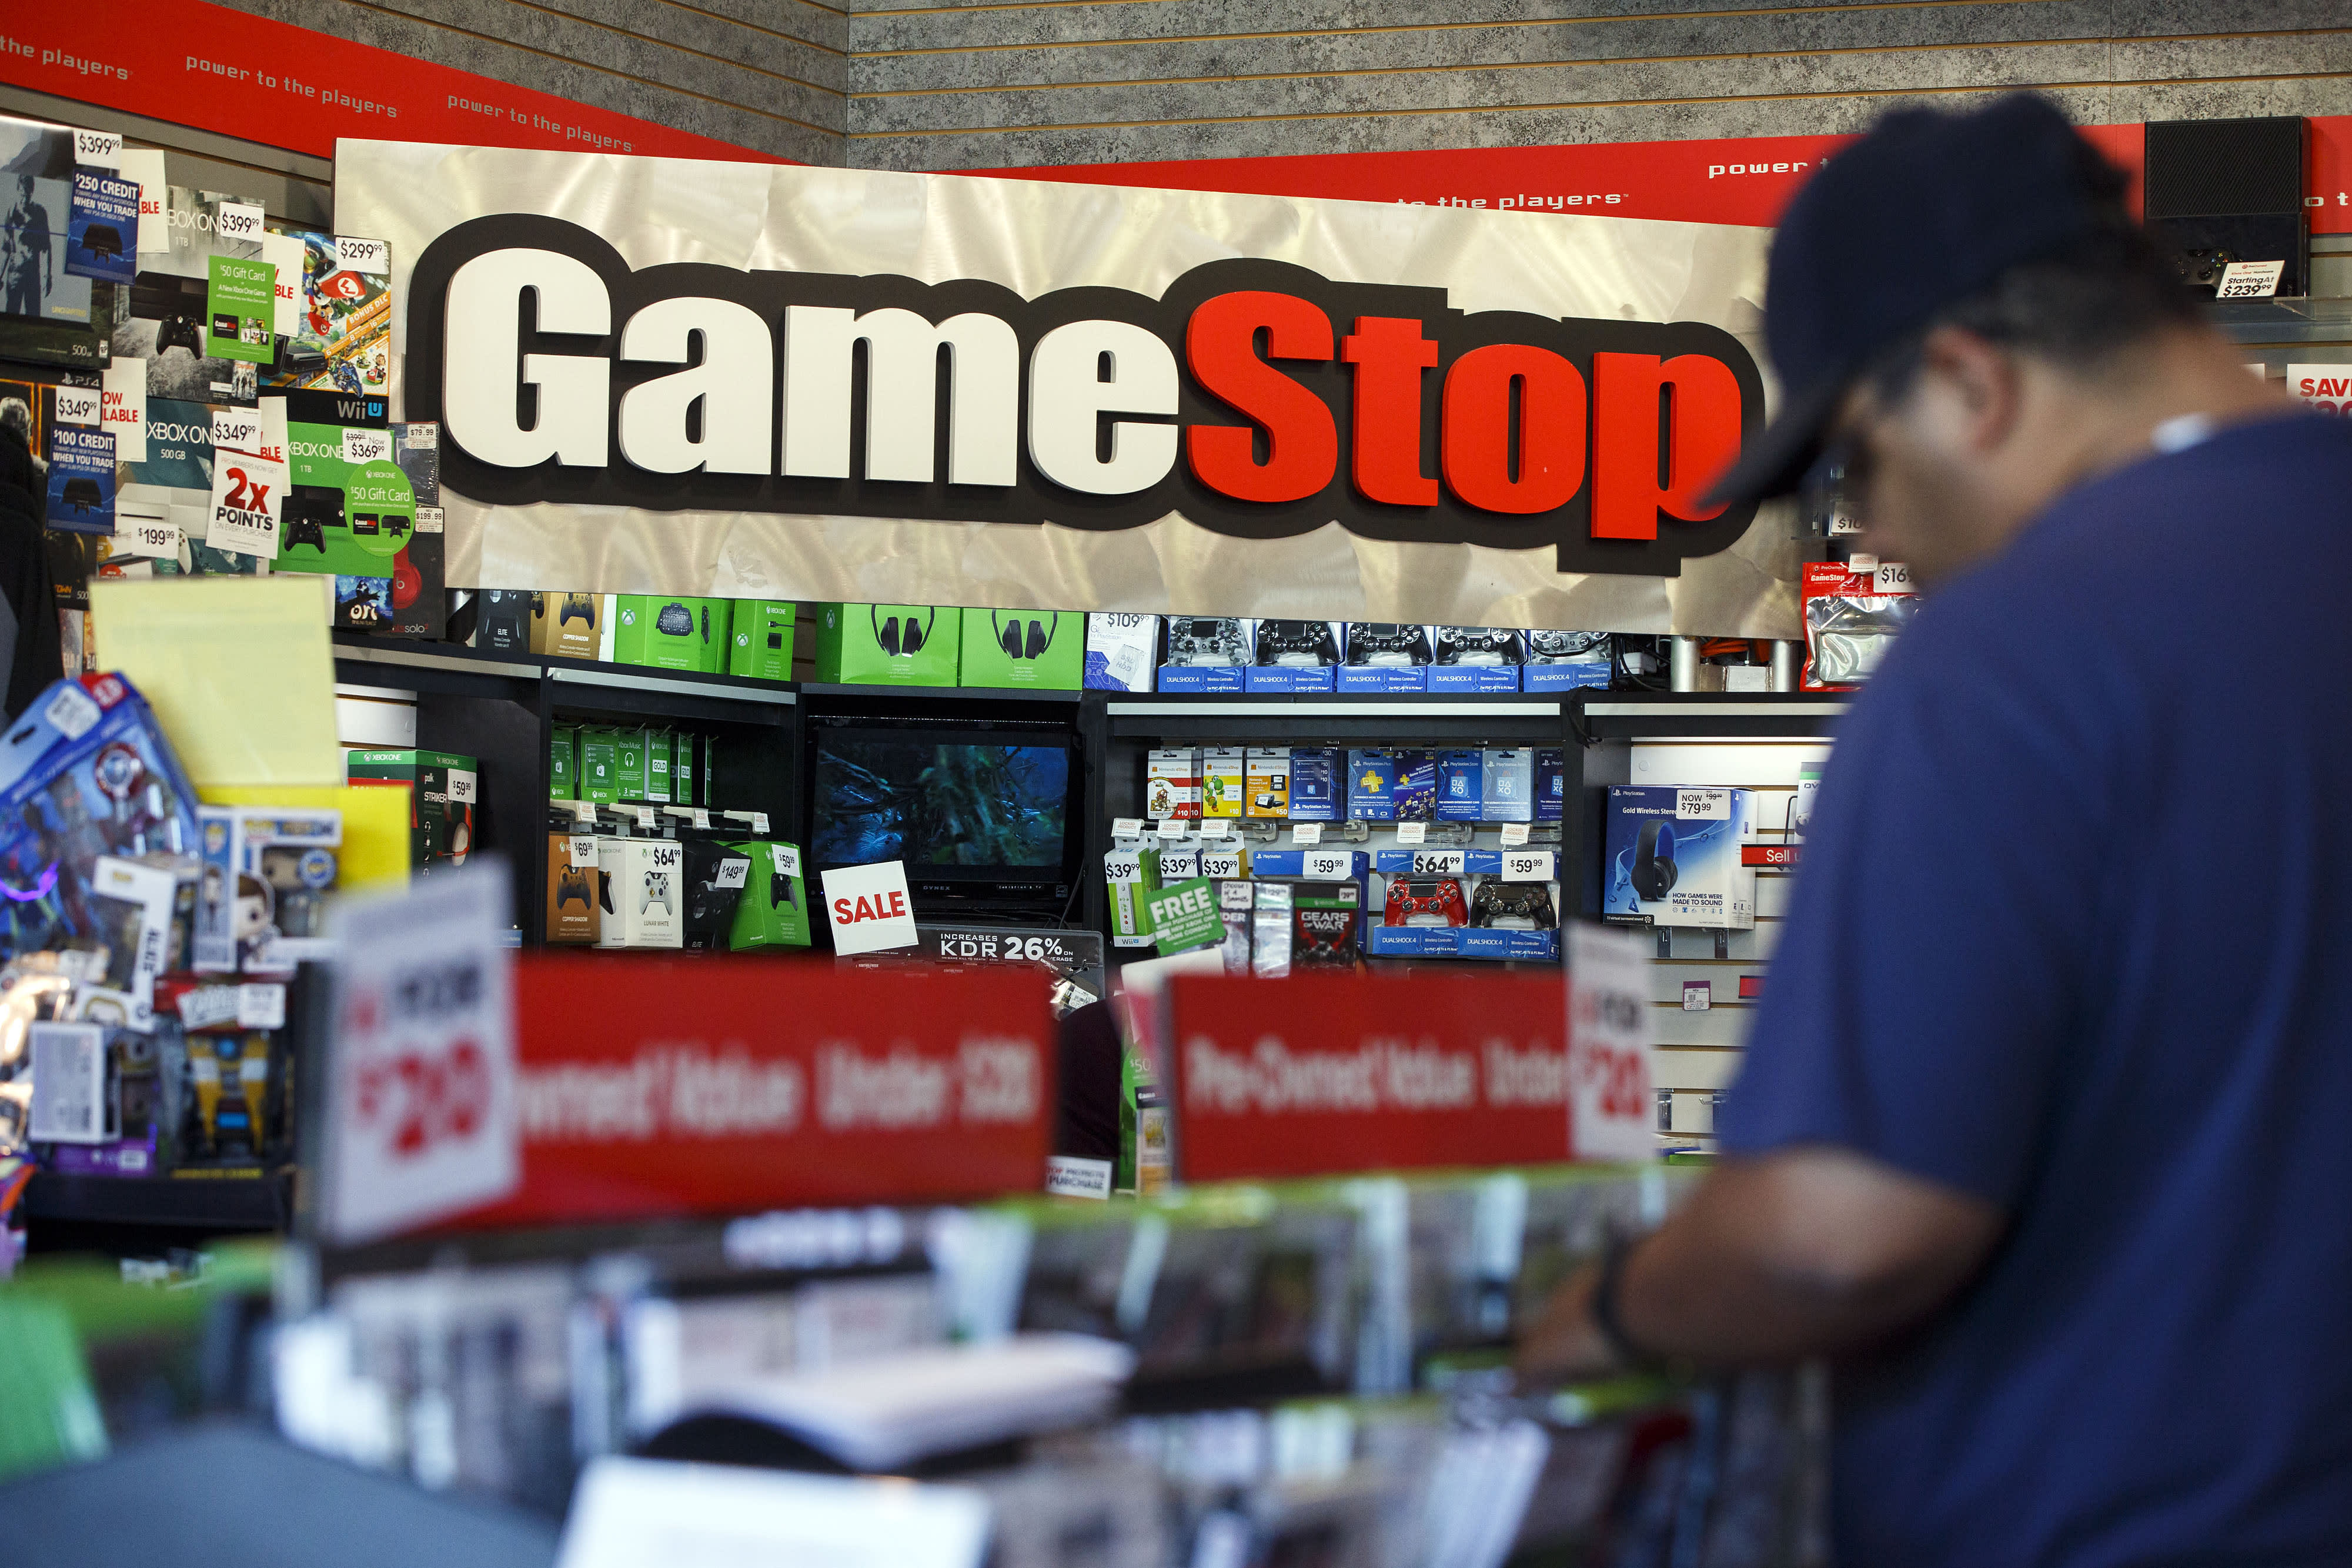 GameStop jumps more than 130 even as hedge funds cover short bets